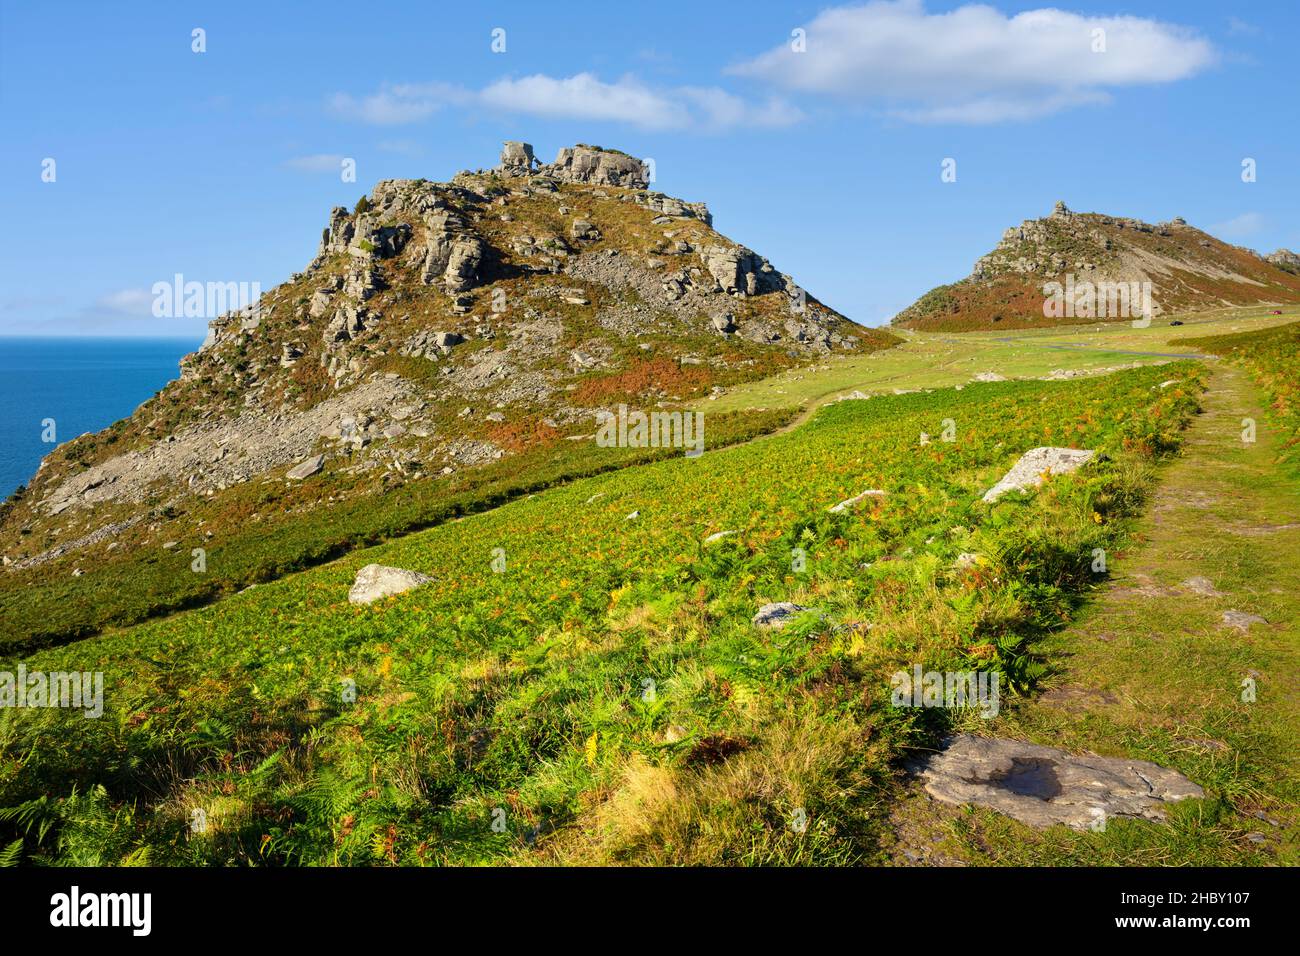 Castle Rock Valley of the Rocks Exmoor National park near Lynton and Lynmouth Devon England UK GB Europe Stock Photo